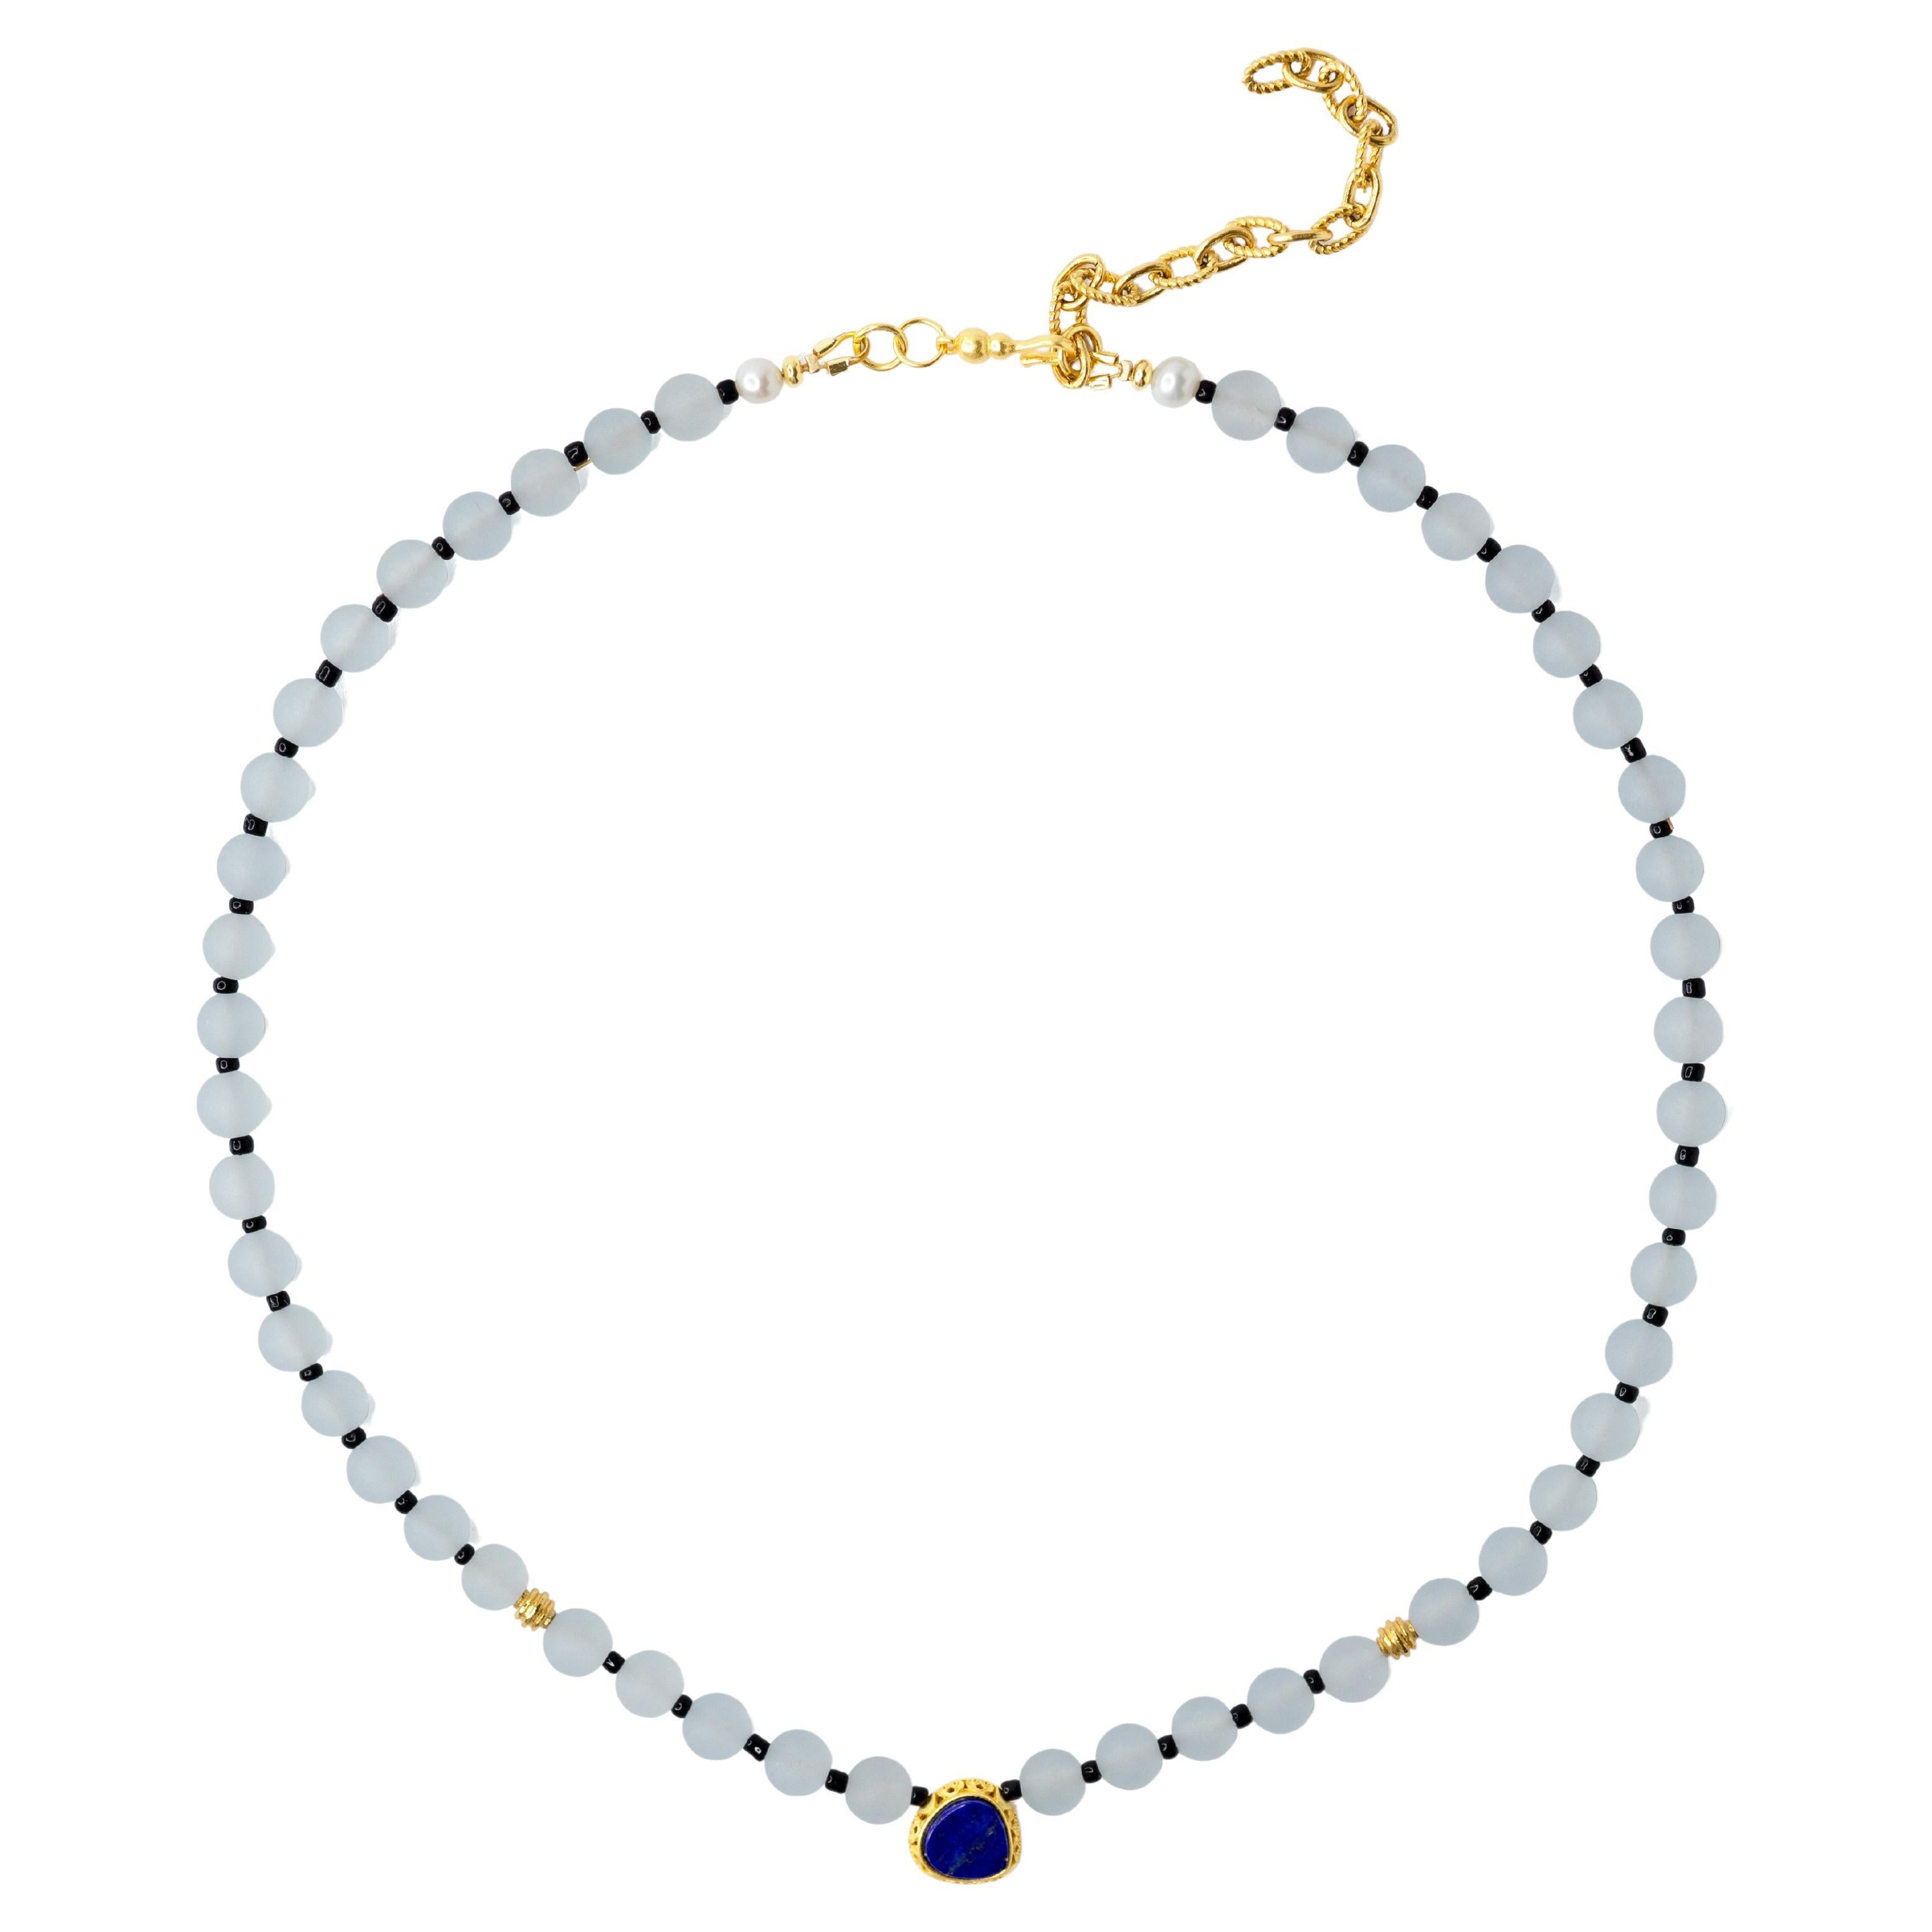 Lapis Lazuli, Chalcedony, Gold Beaded Necklace by Bombyx House For Sale